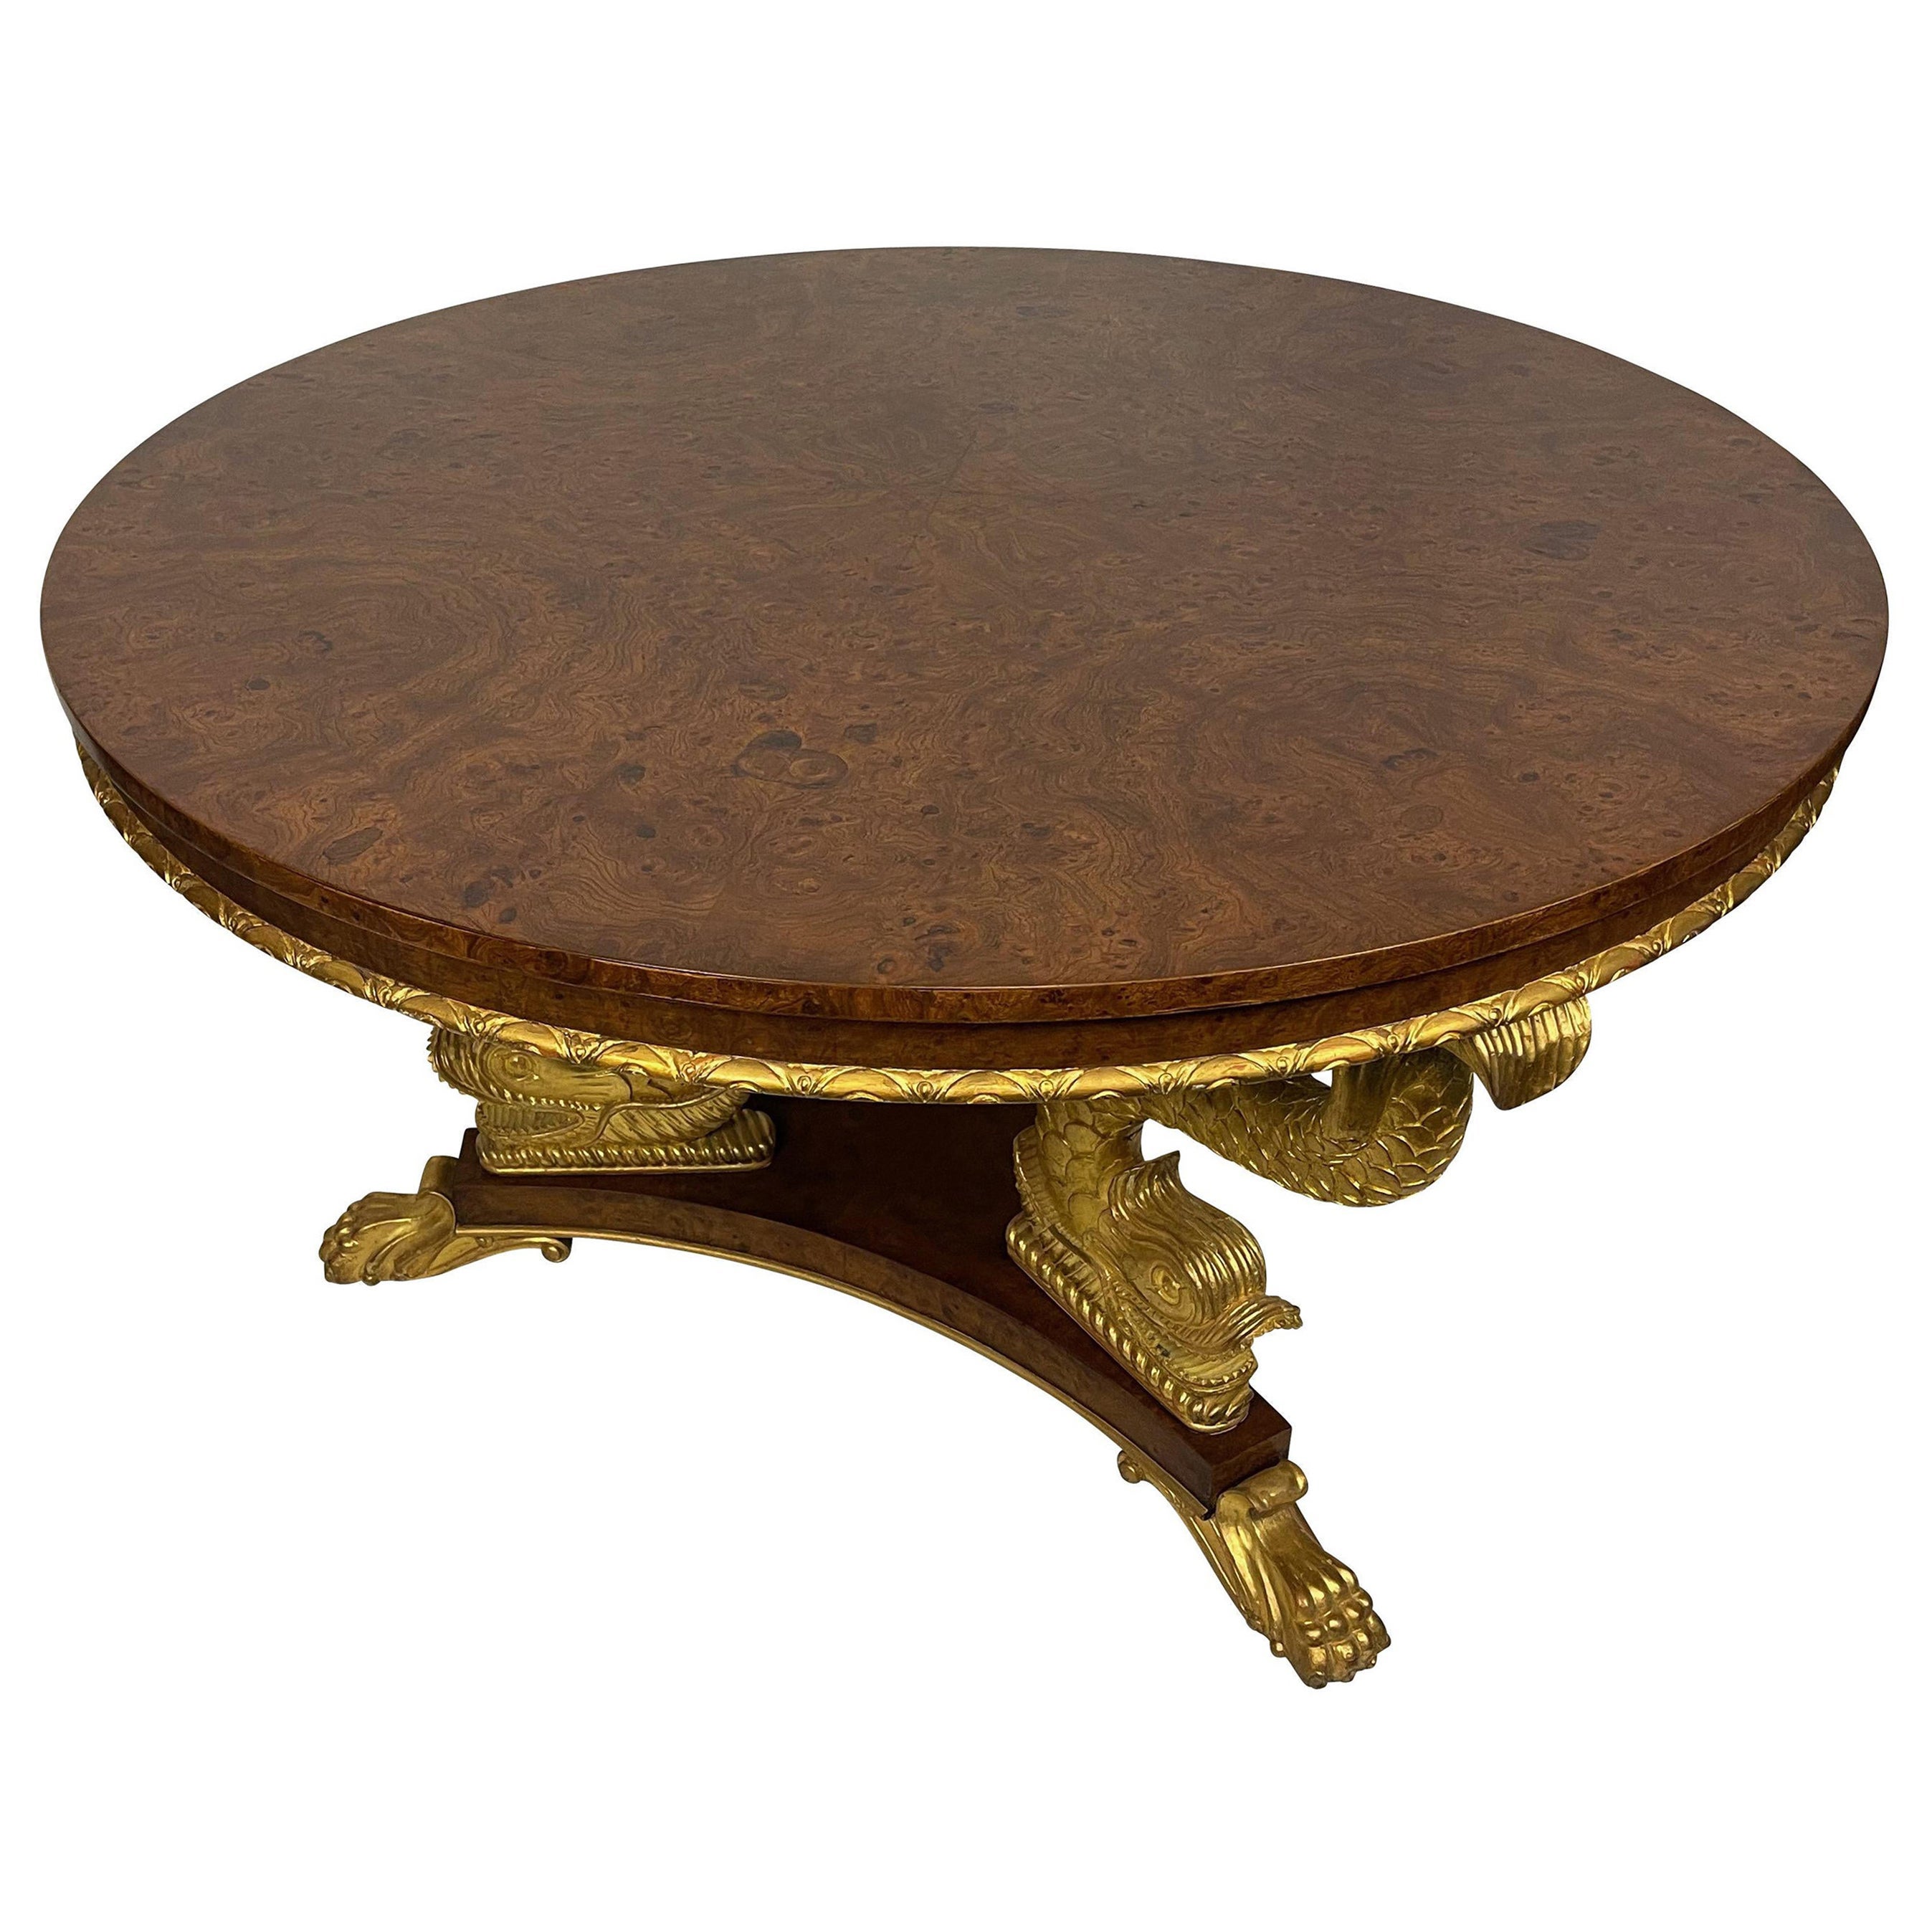 Gold gilt and light burled wood dolphin base center table. Exquisitely carved, and the burlwood surface has been completely professionally refinished dolphin base center table. Great quality and finely carving signed Smith and Watson since 1907.